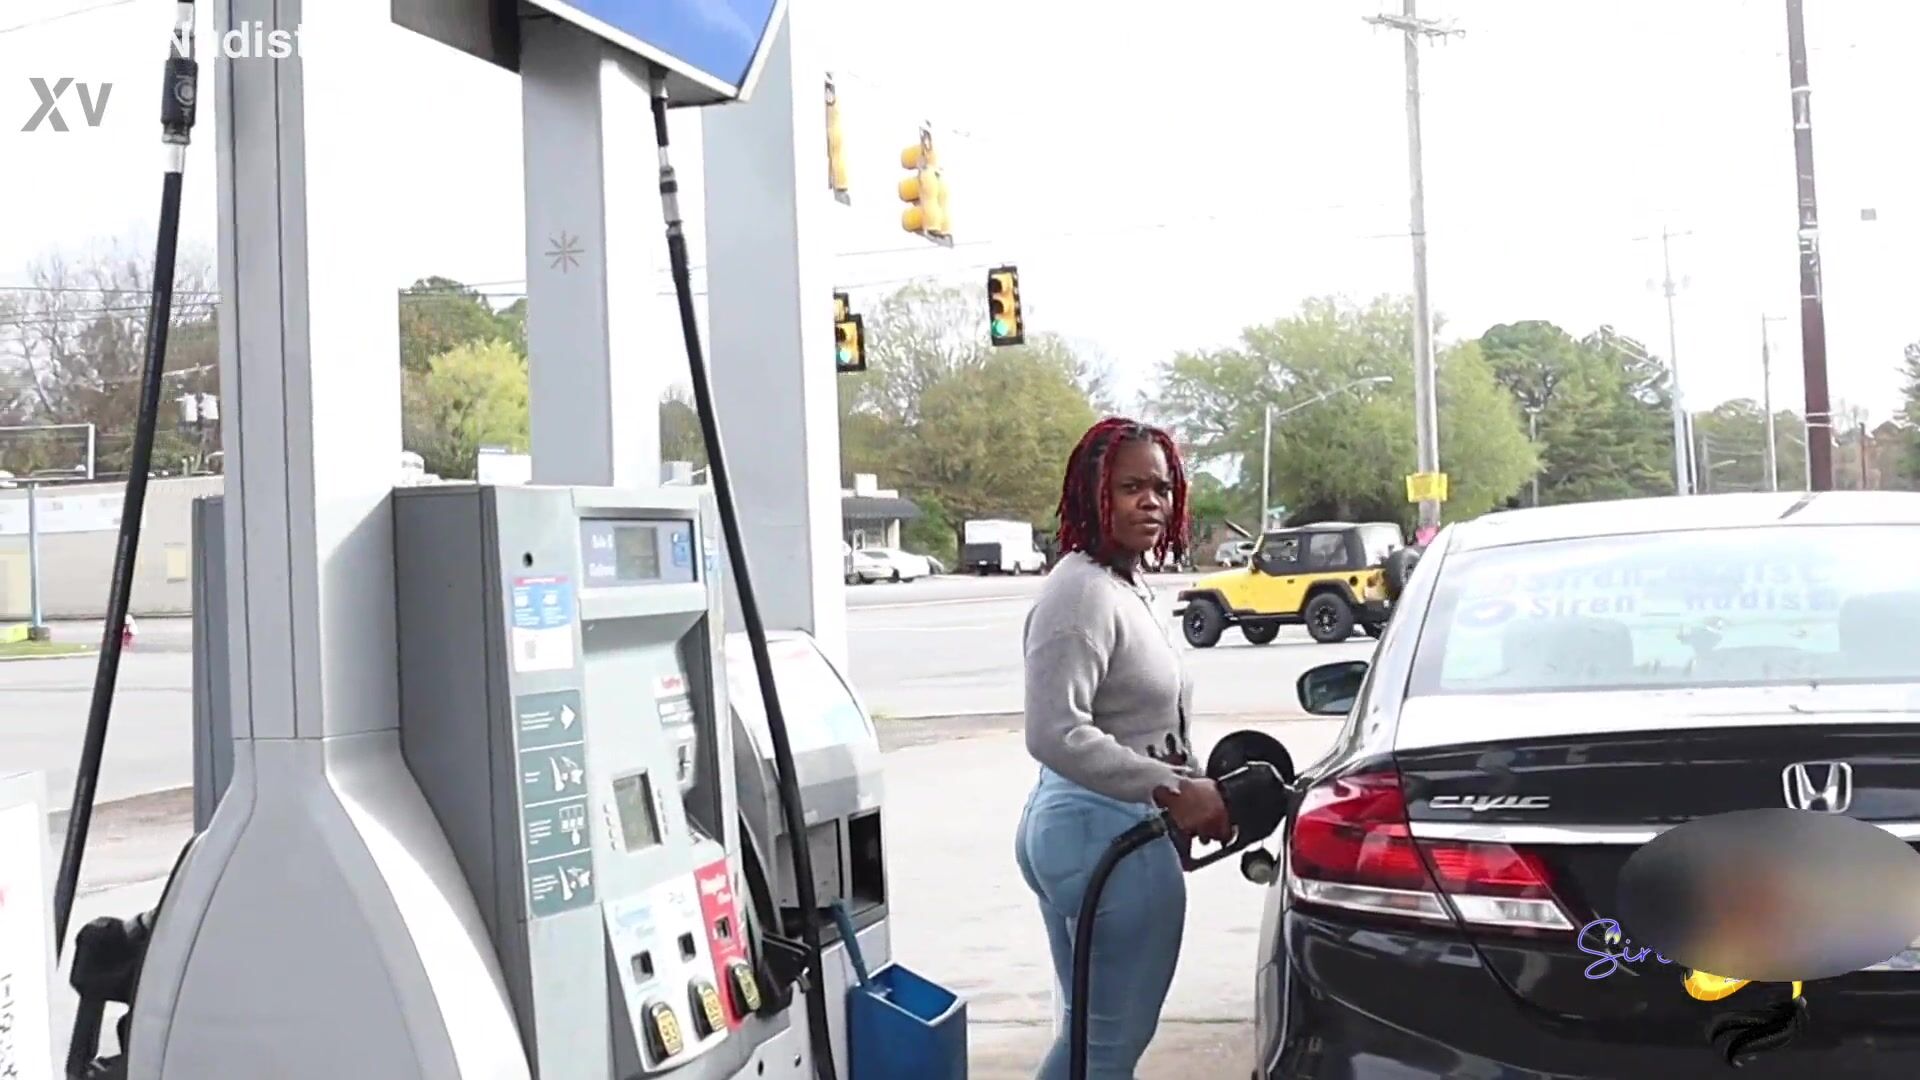 Ebony Fucking In Gas Station - Free That Guy meets a pornstar at the gas station Porn Video - Ebony 8